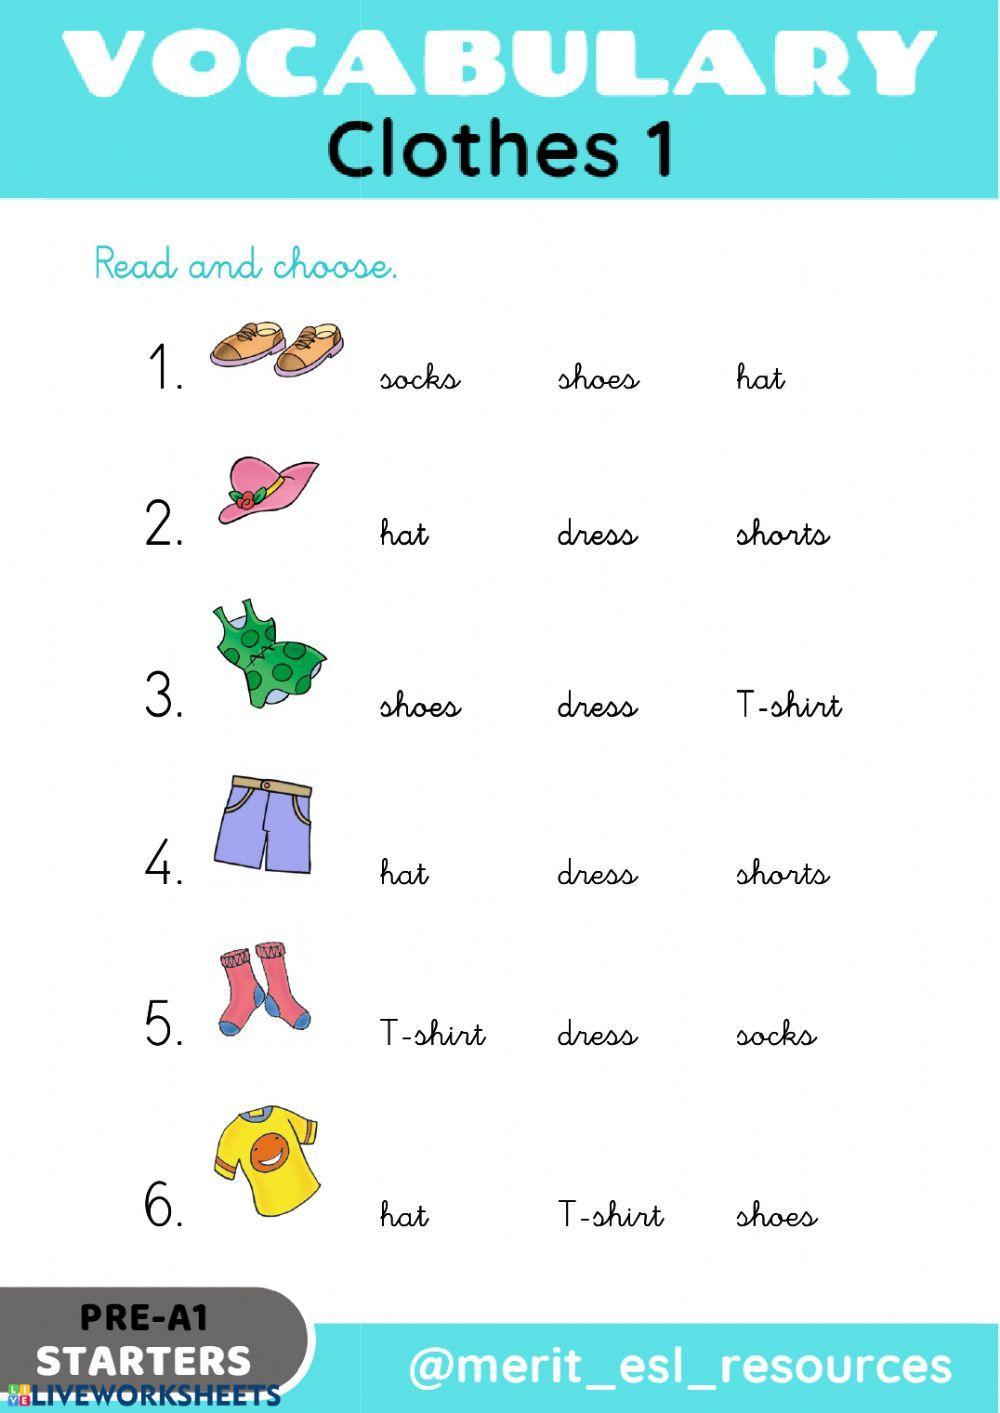 Clothes - Read and choose